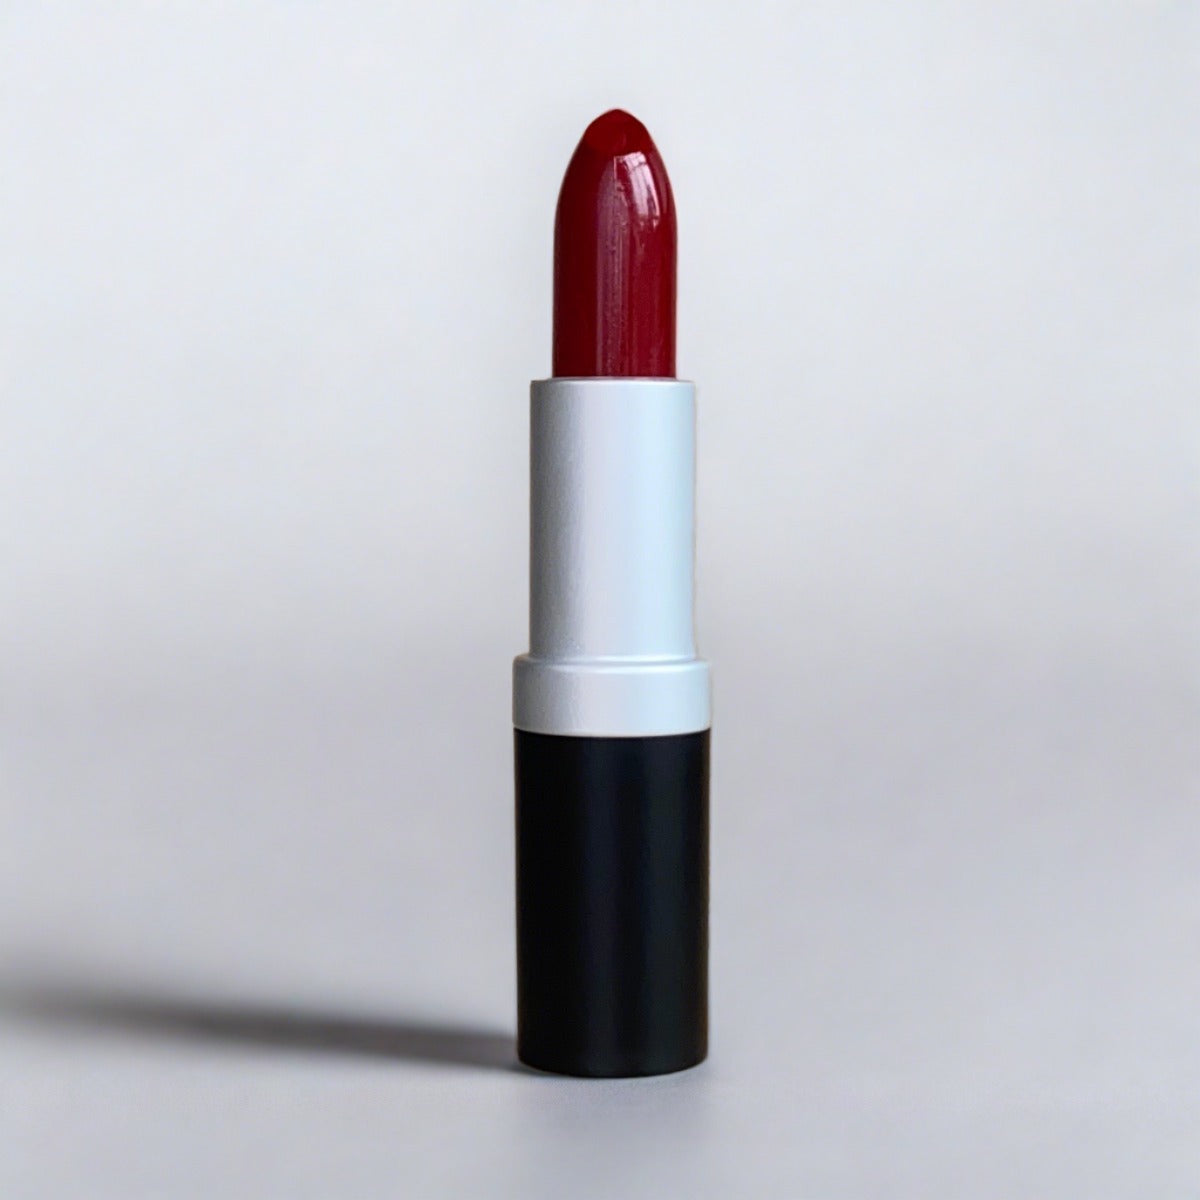 Venetian Red Lipstick, a classic burgundy red with brown undertones